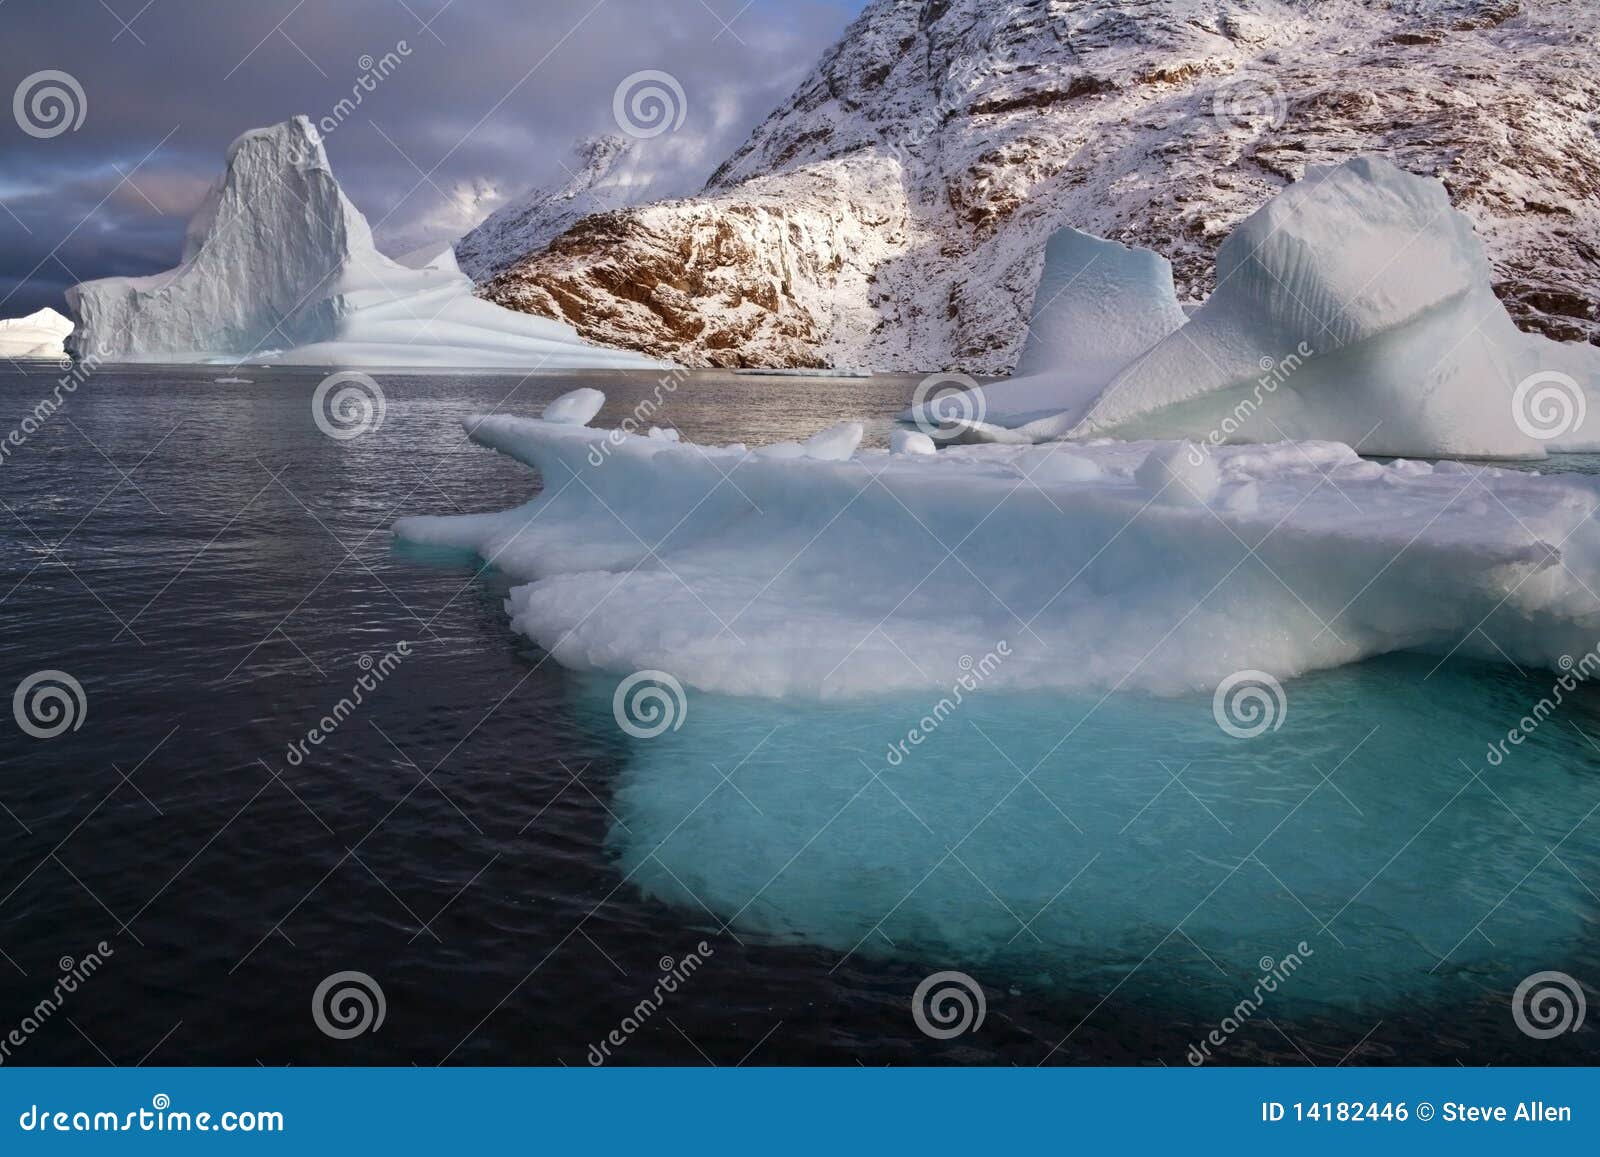 The Arctic - Greenland. Harry Inlet in Scoresbysund on the Arctic coast of north eastern Greenland